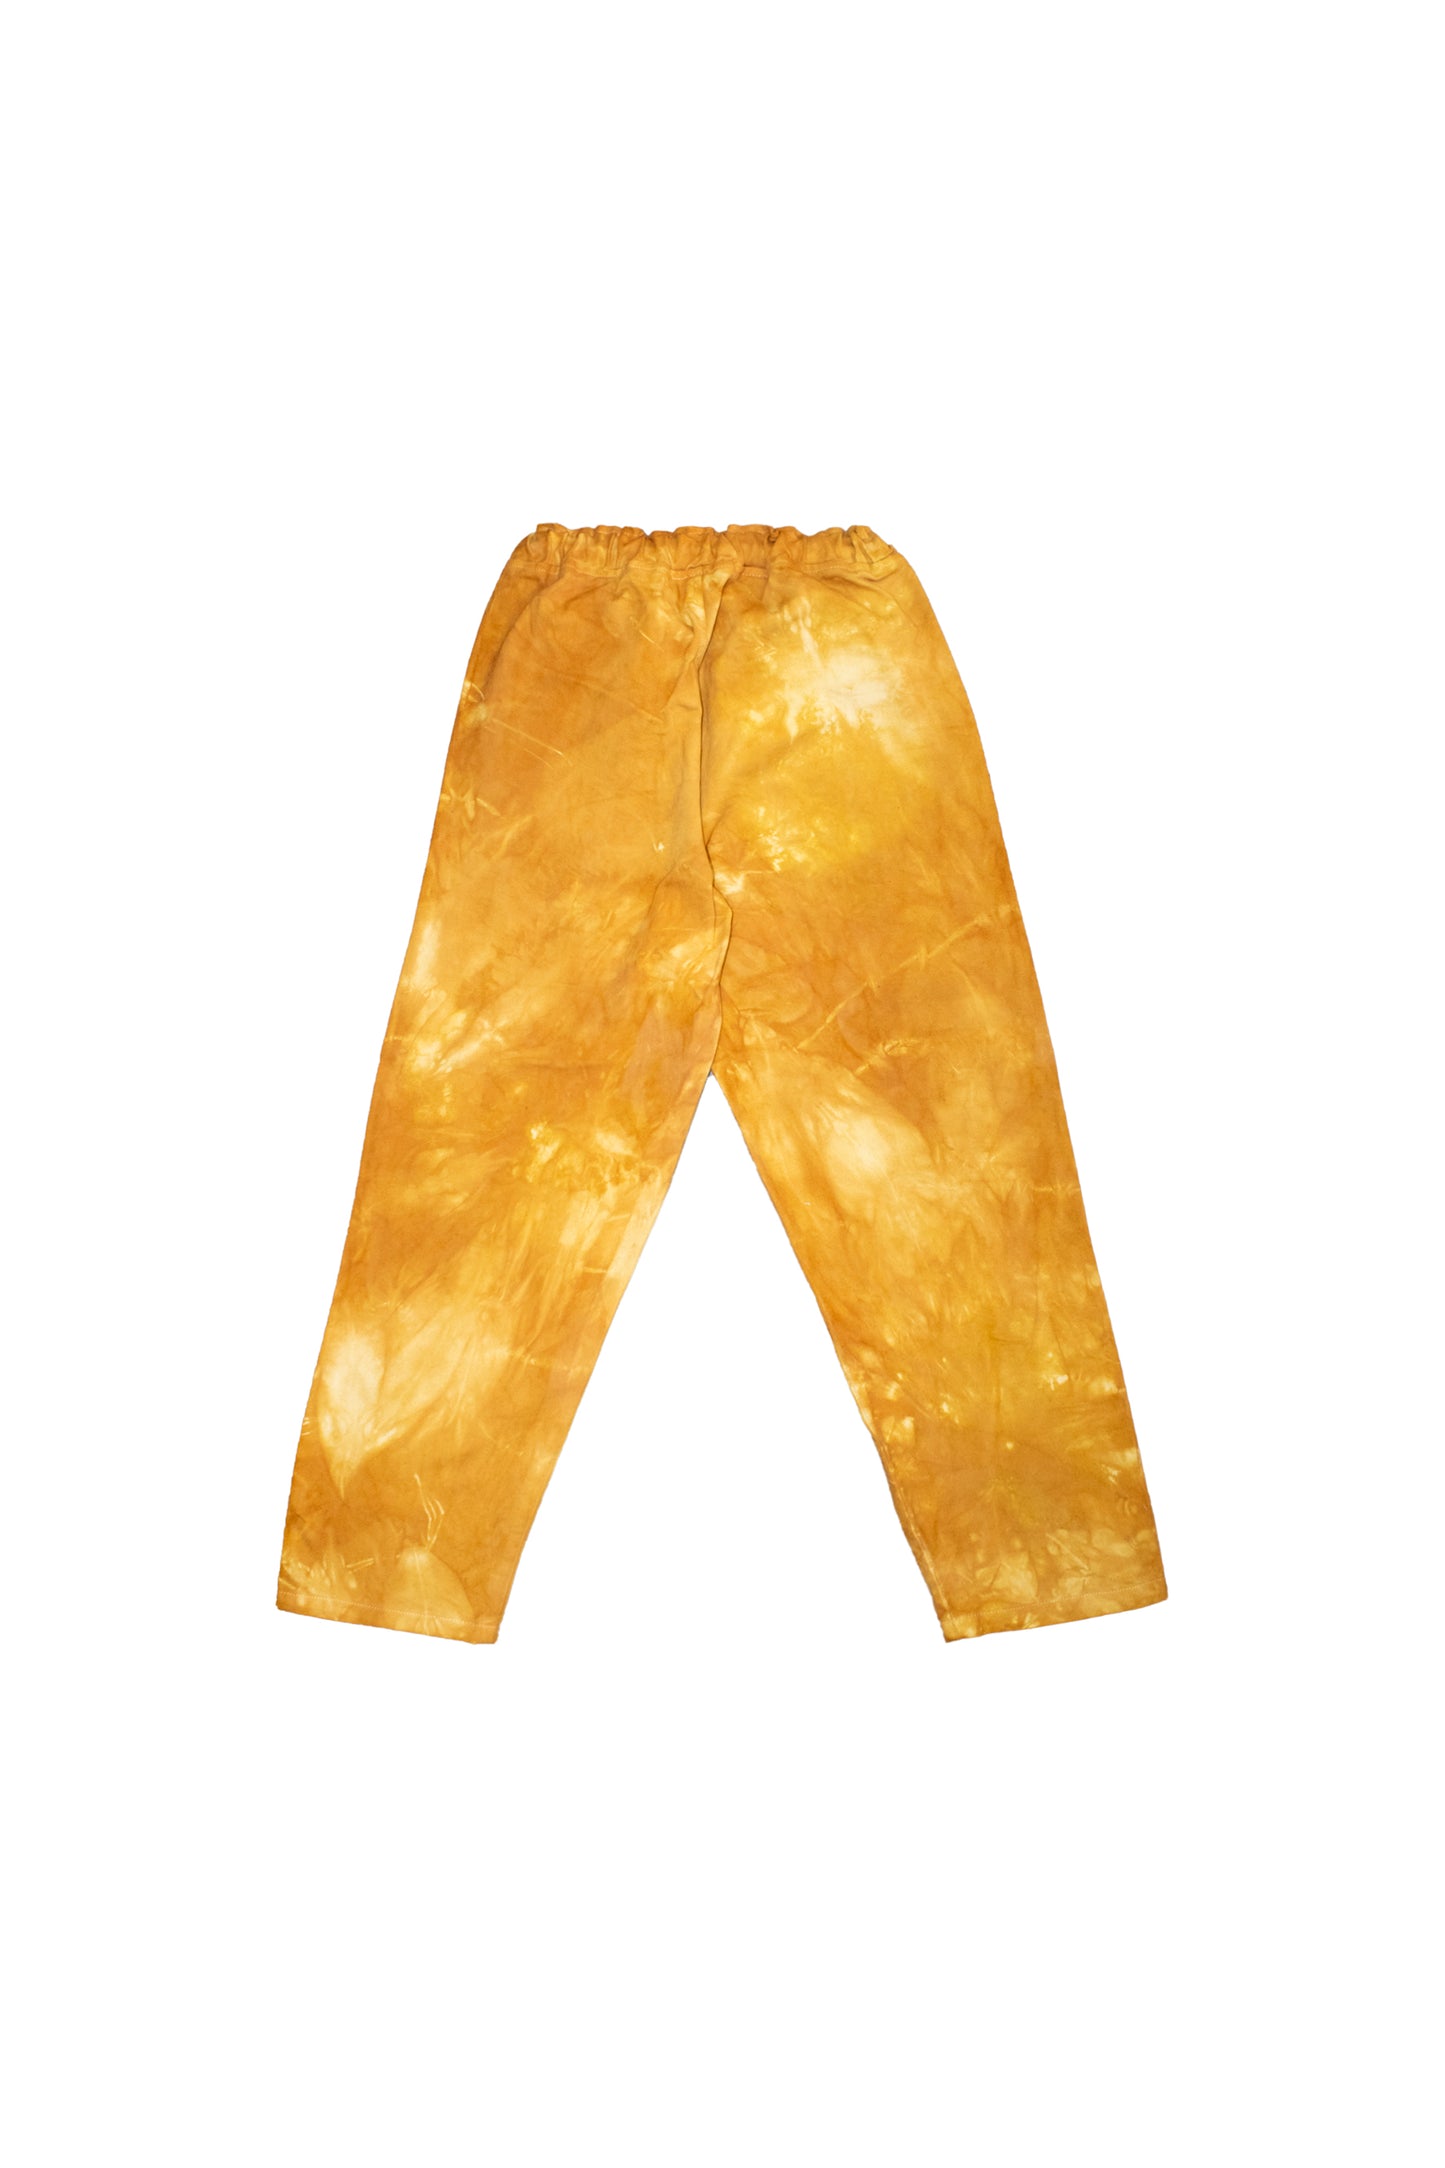 FRAICHE X NORTH HILL - STONE DYED CARROT PANT